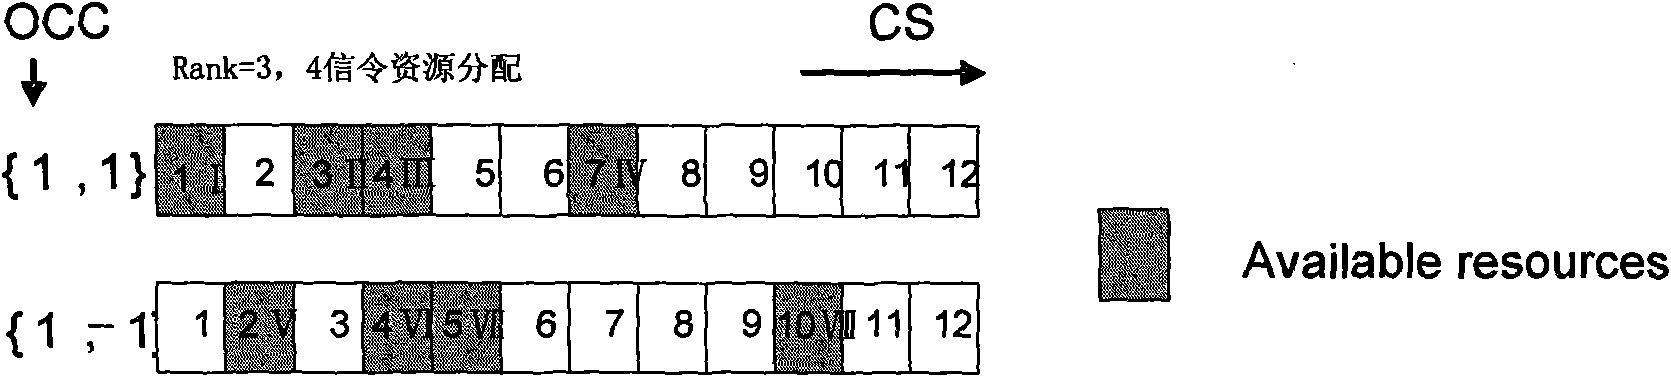 Signaling resource allocation method for uplink reference signal